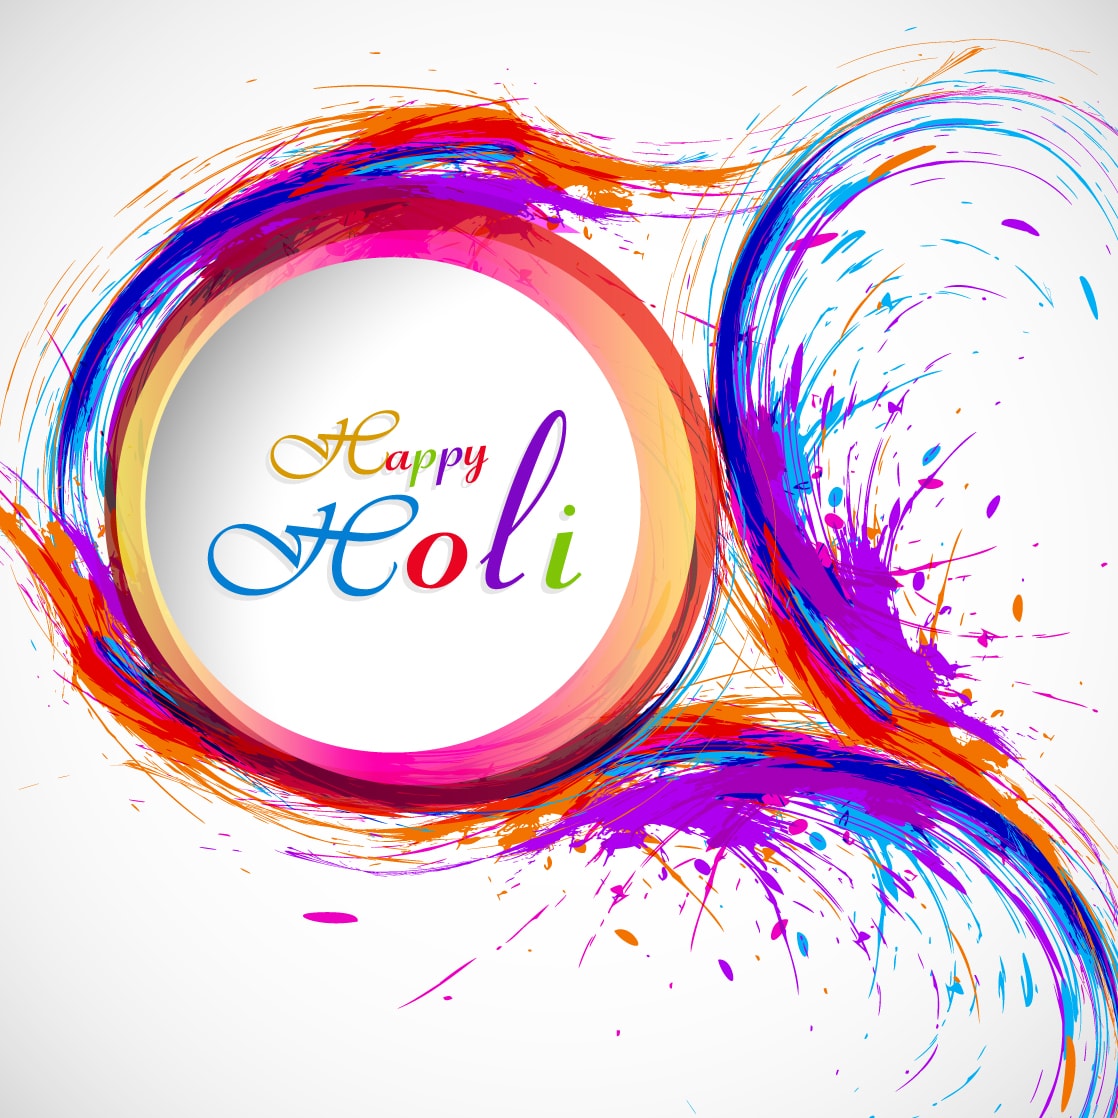 Free download Happy Holi Images Wallpapers Pictures 2020 For ...